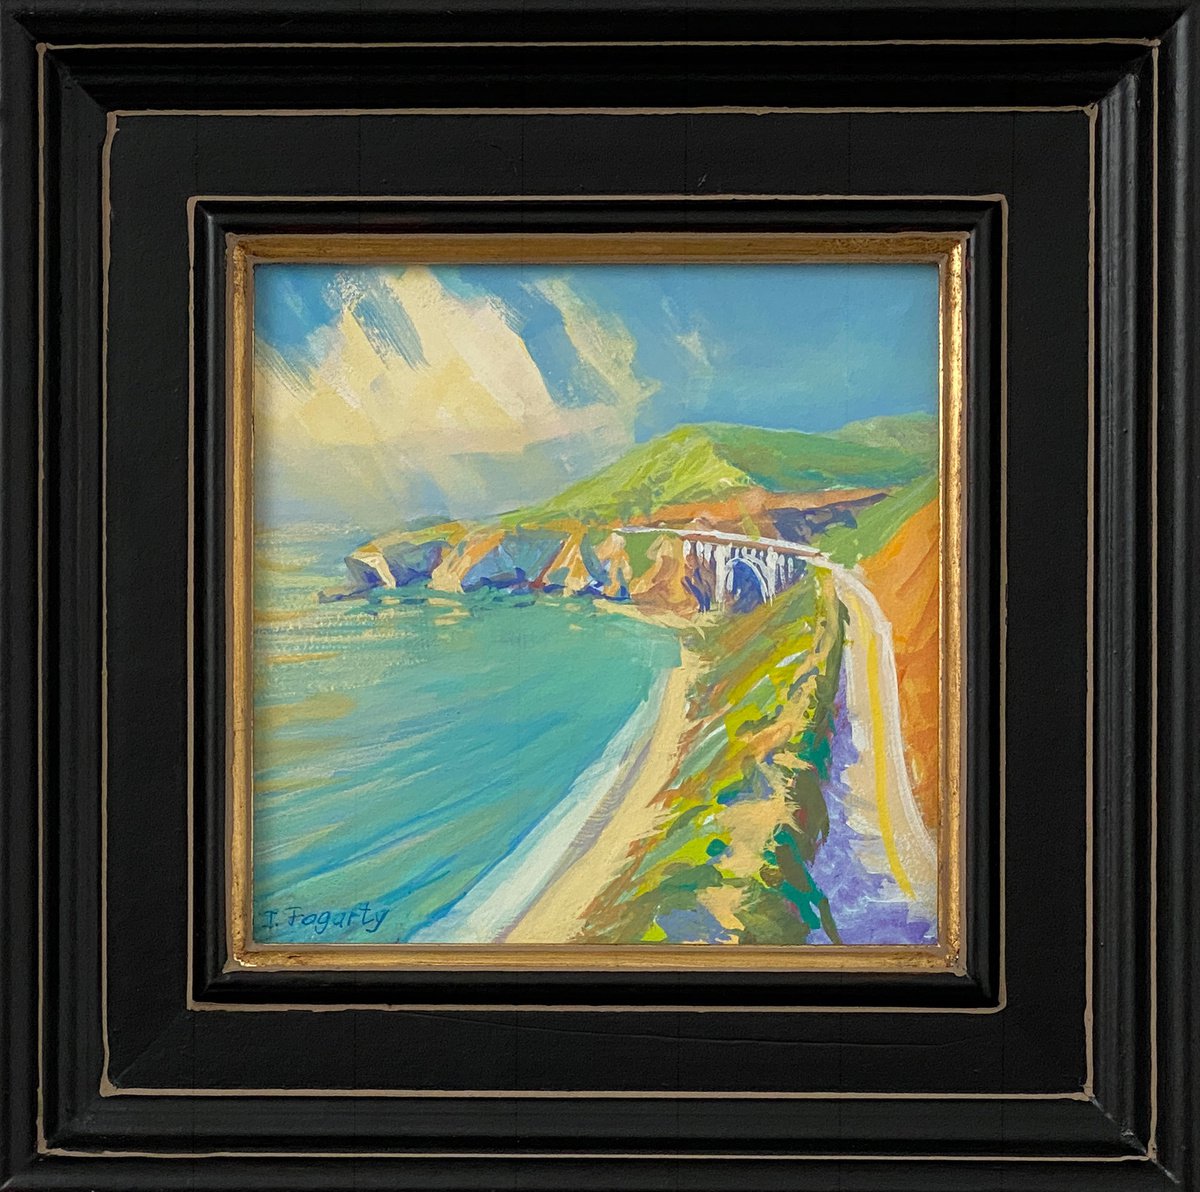 Northbound Towards Carmel-by-the-Sea Landscape by Tatyana Fogarty